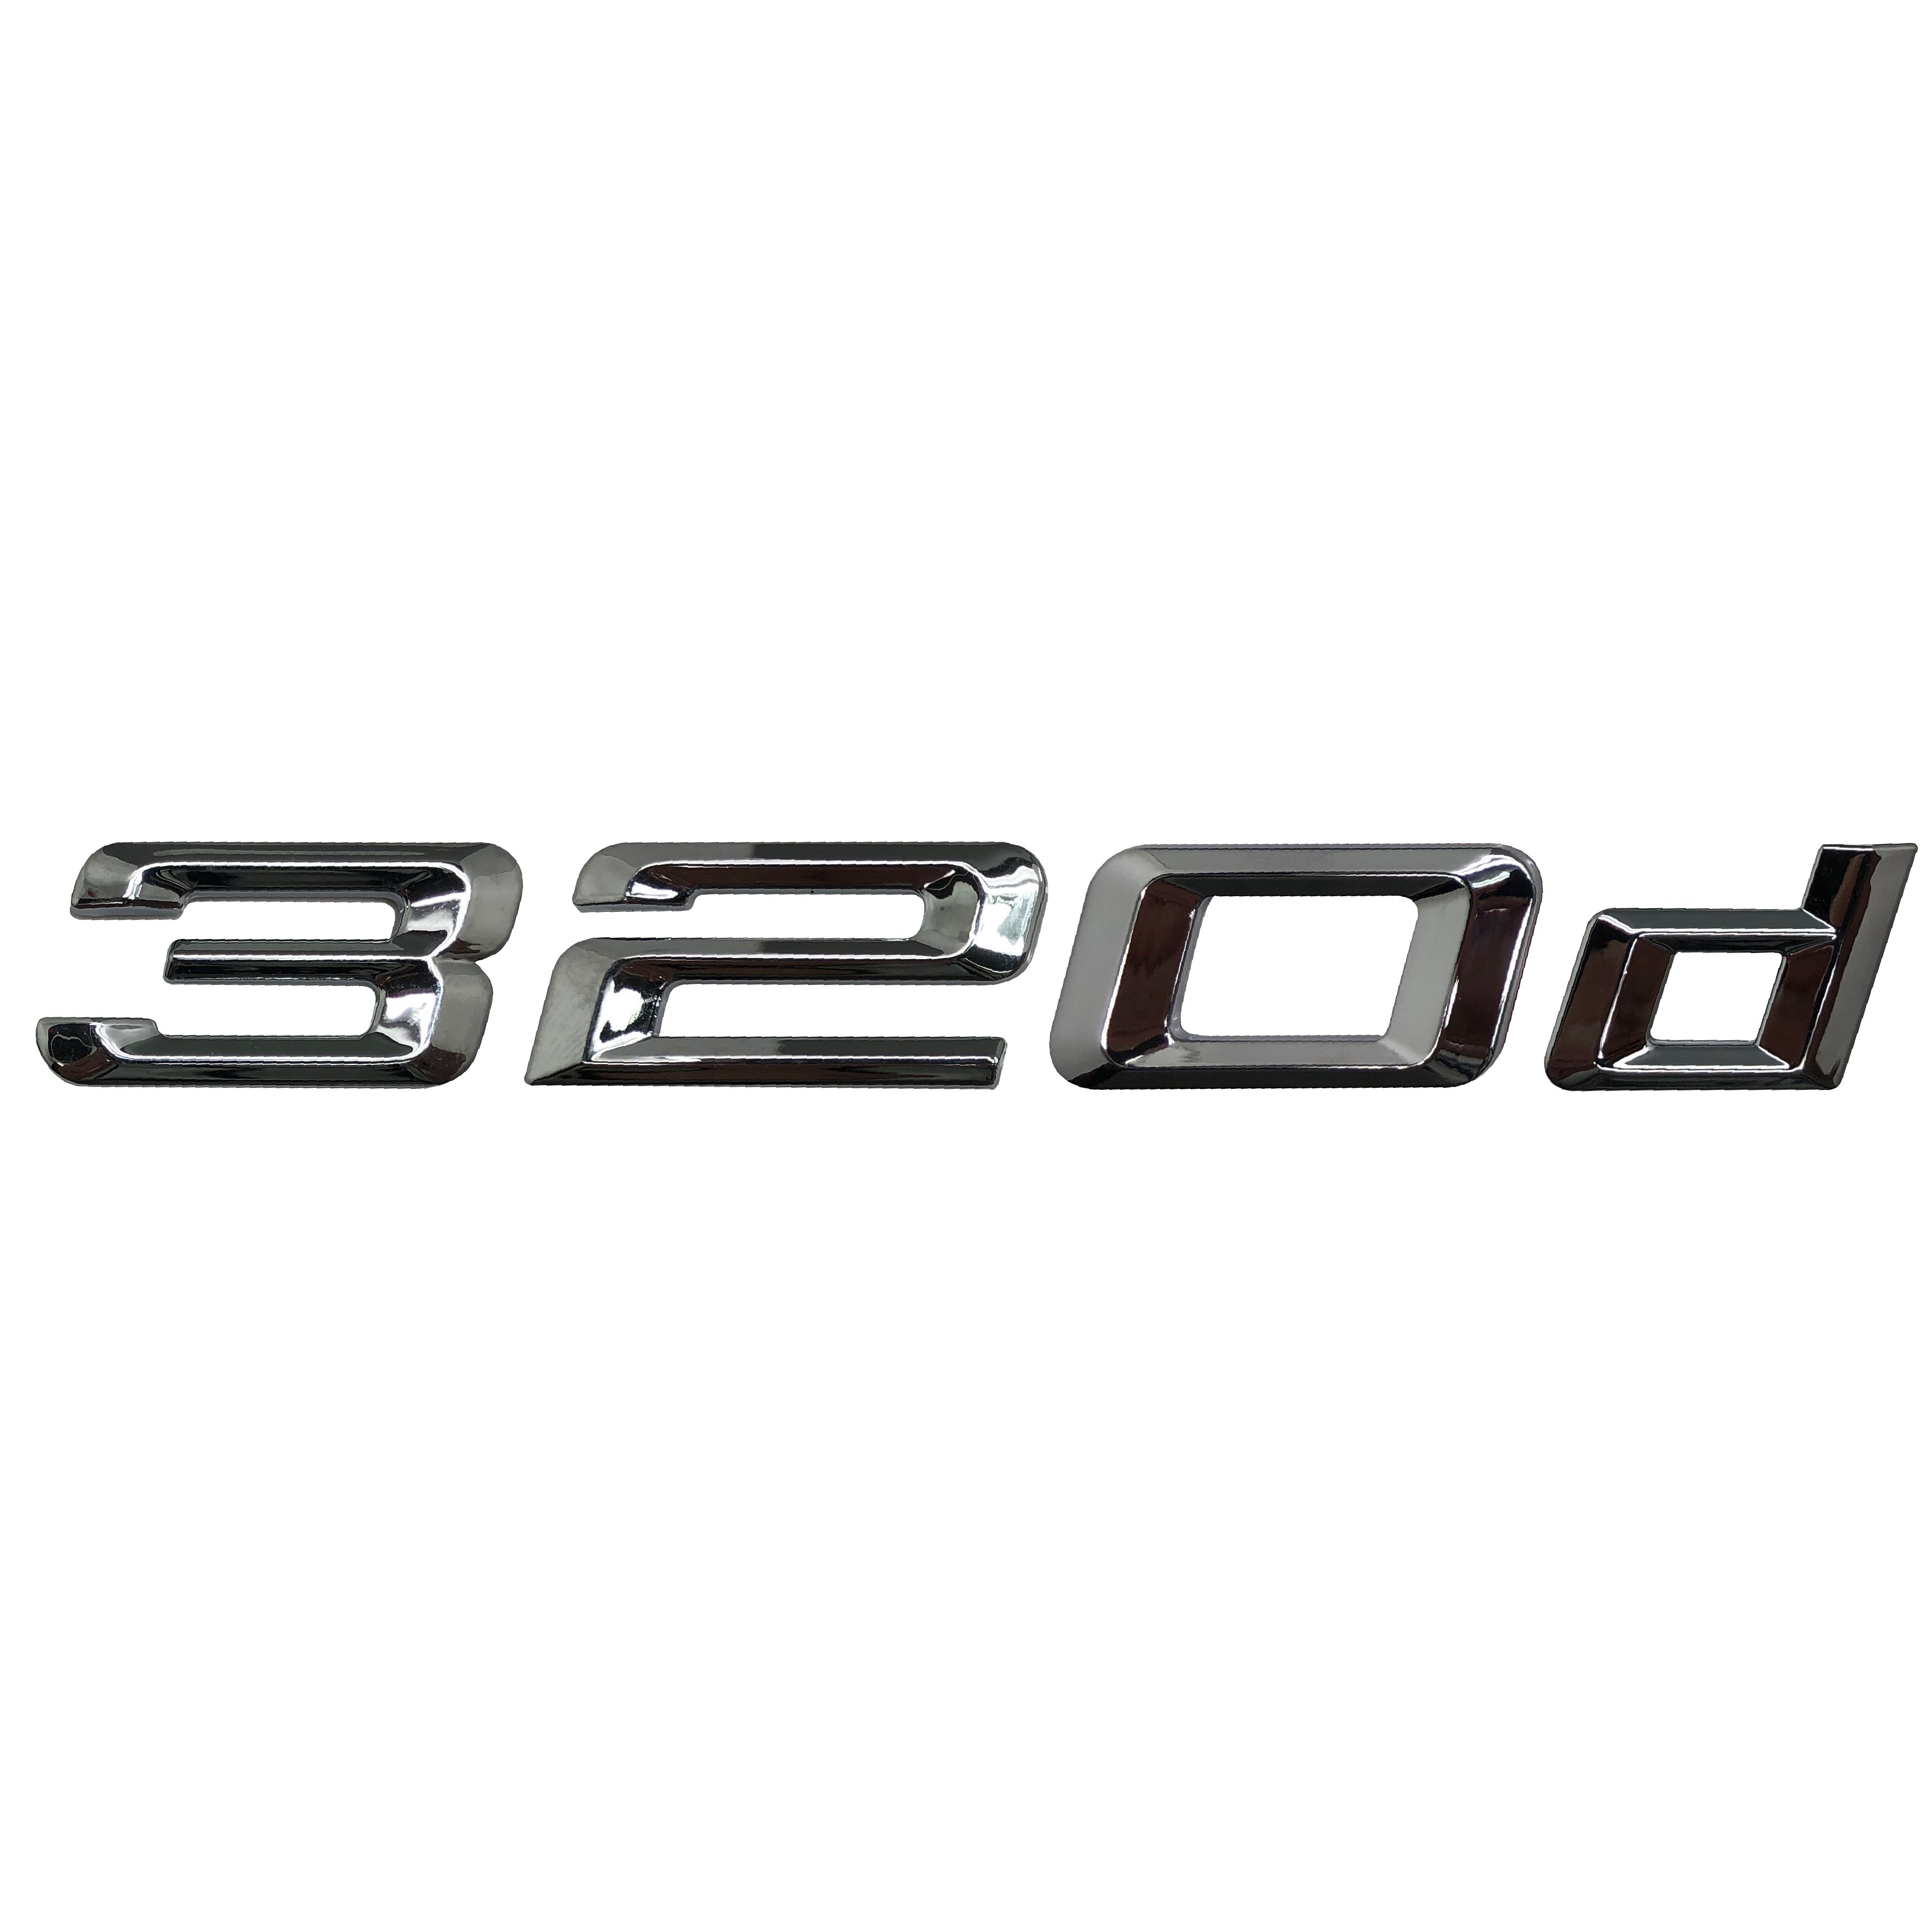 Silver Chrome BMW 320d Rear Boot Badge Emblem Number Letter For 3 Series E93 F30 F31 F34 G20